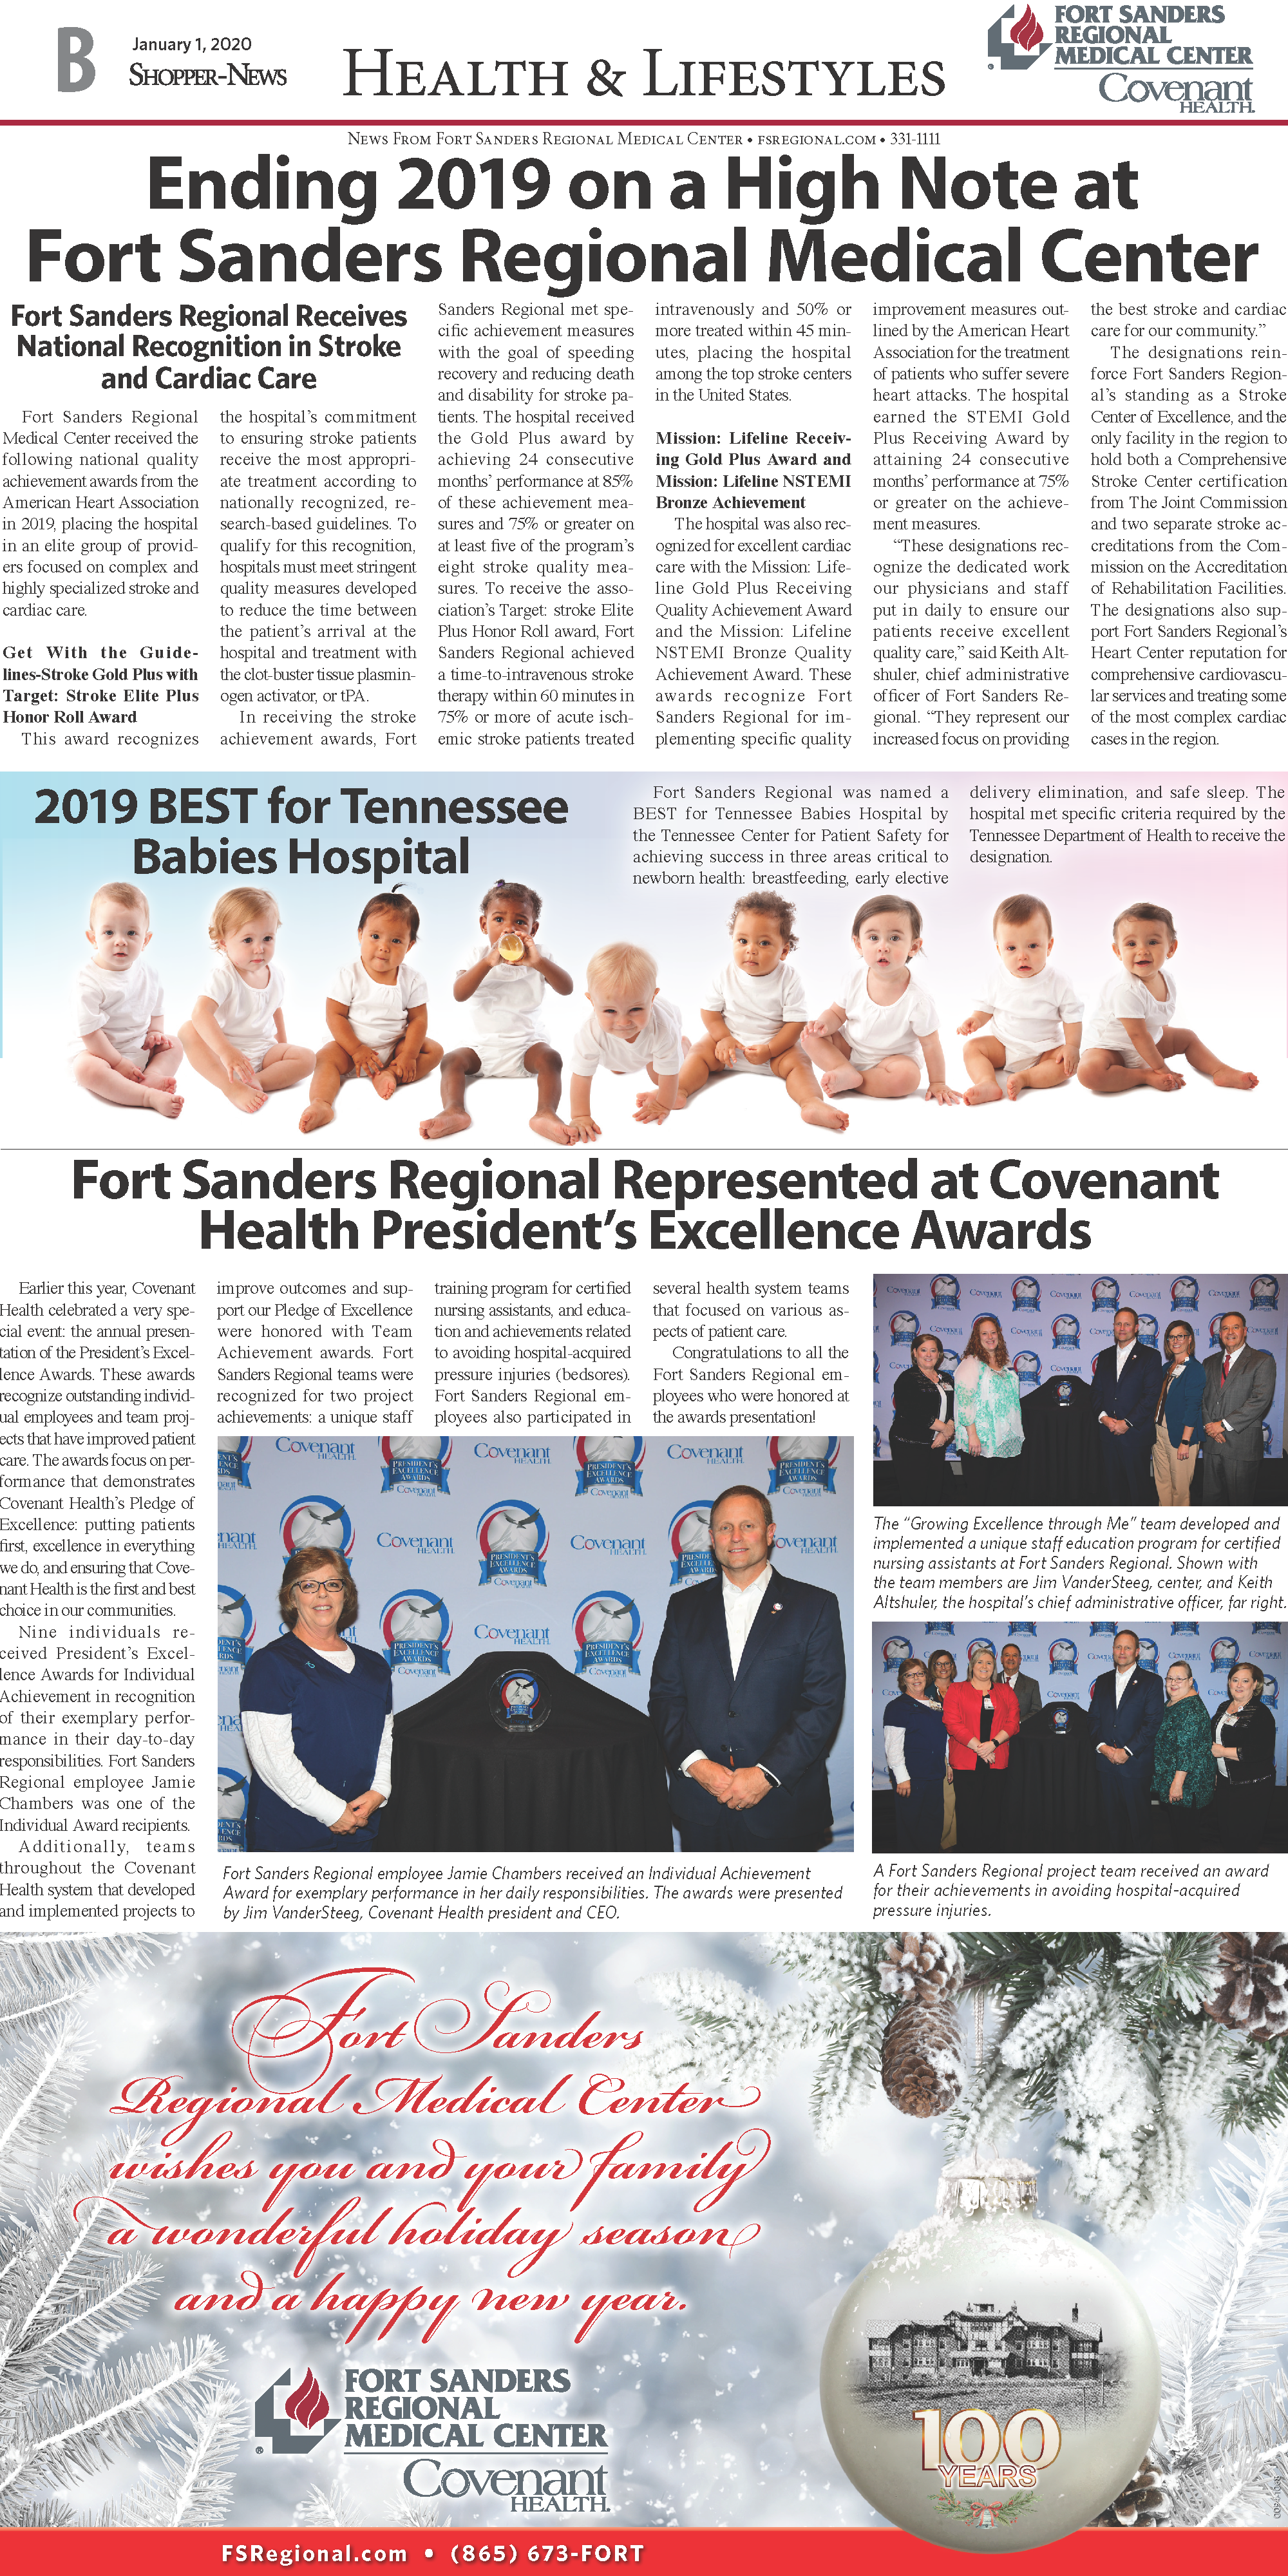 2019 awards round-up for Fort Sanders Regional Medical Center; A Shopper News feature